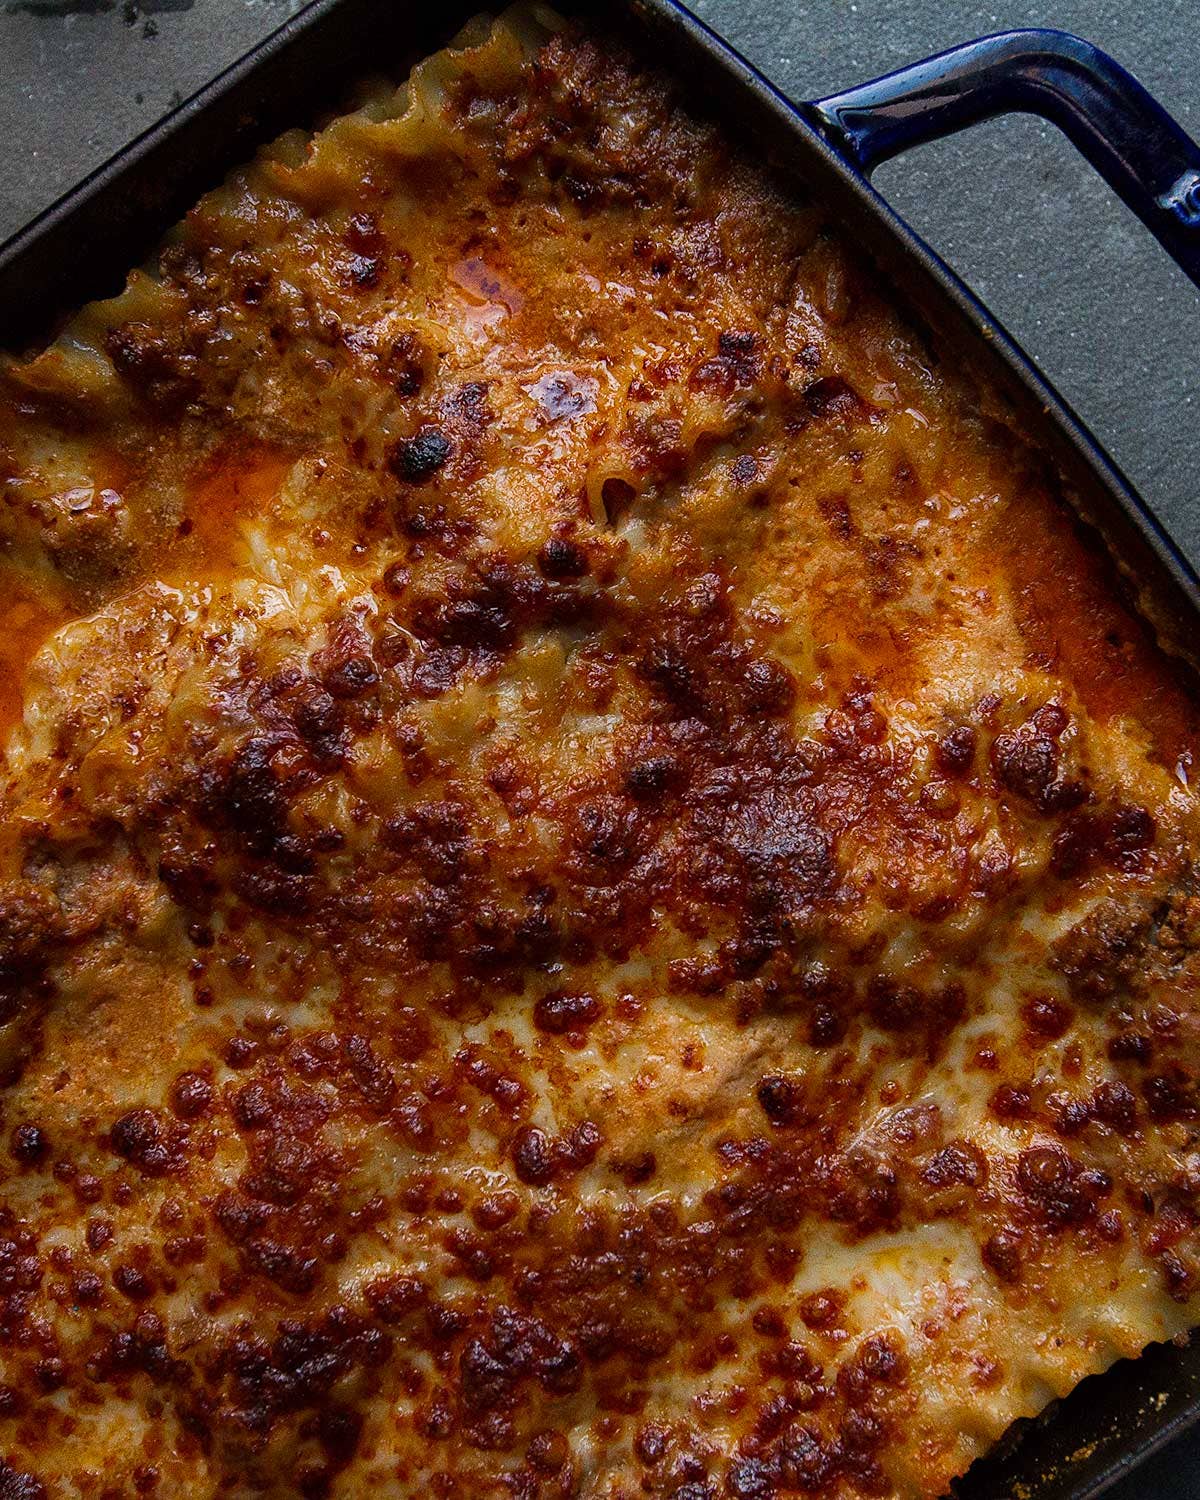 Crispy on Top, Gooey in the Middle—The Best Lasagna Pans Get it Right Every Time